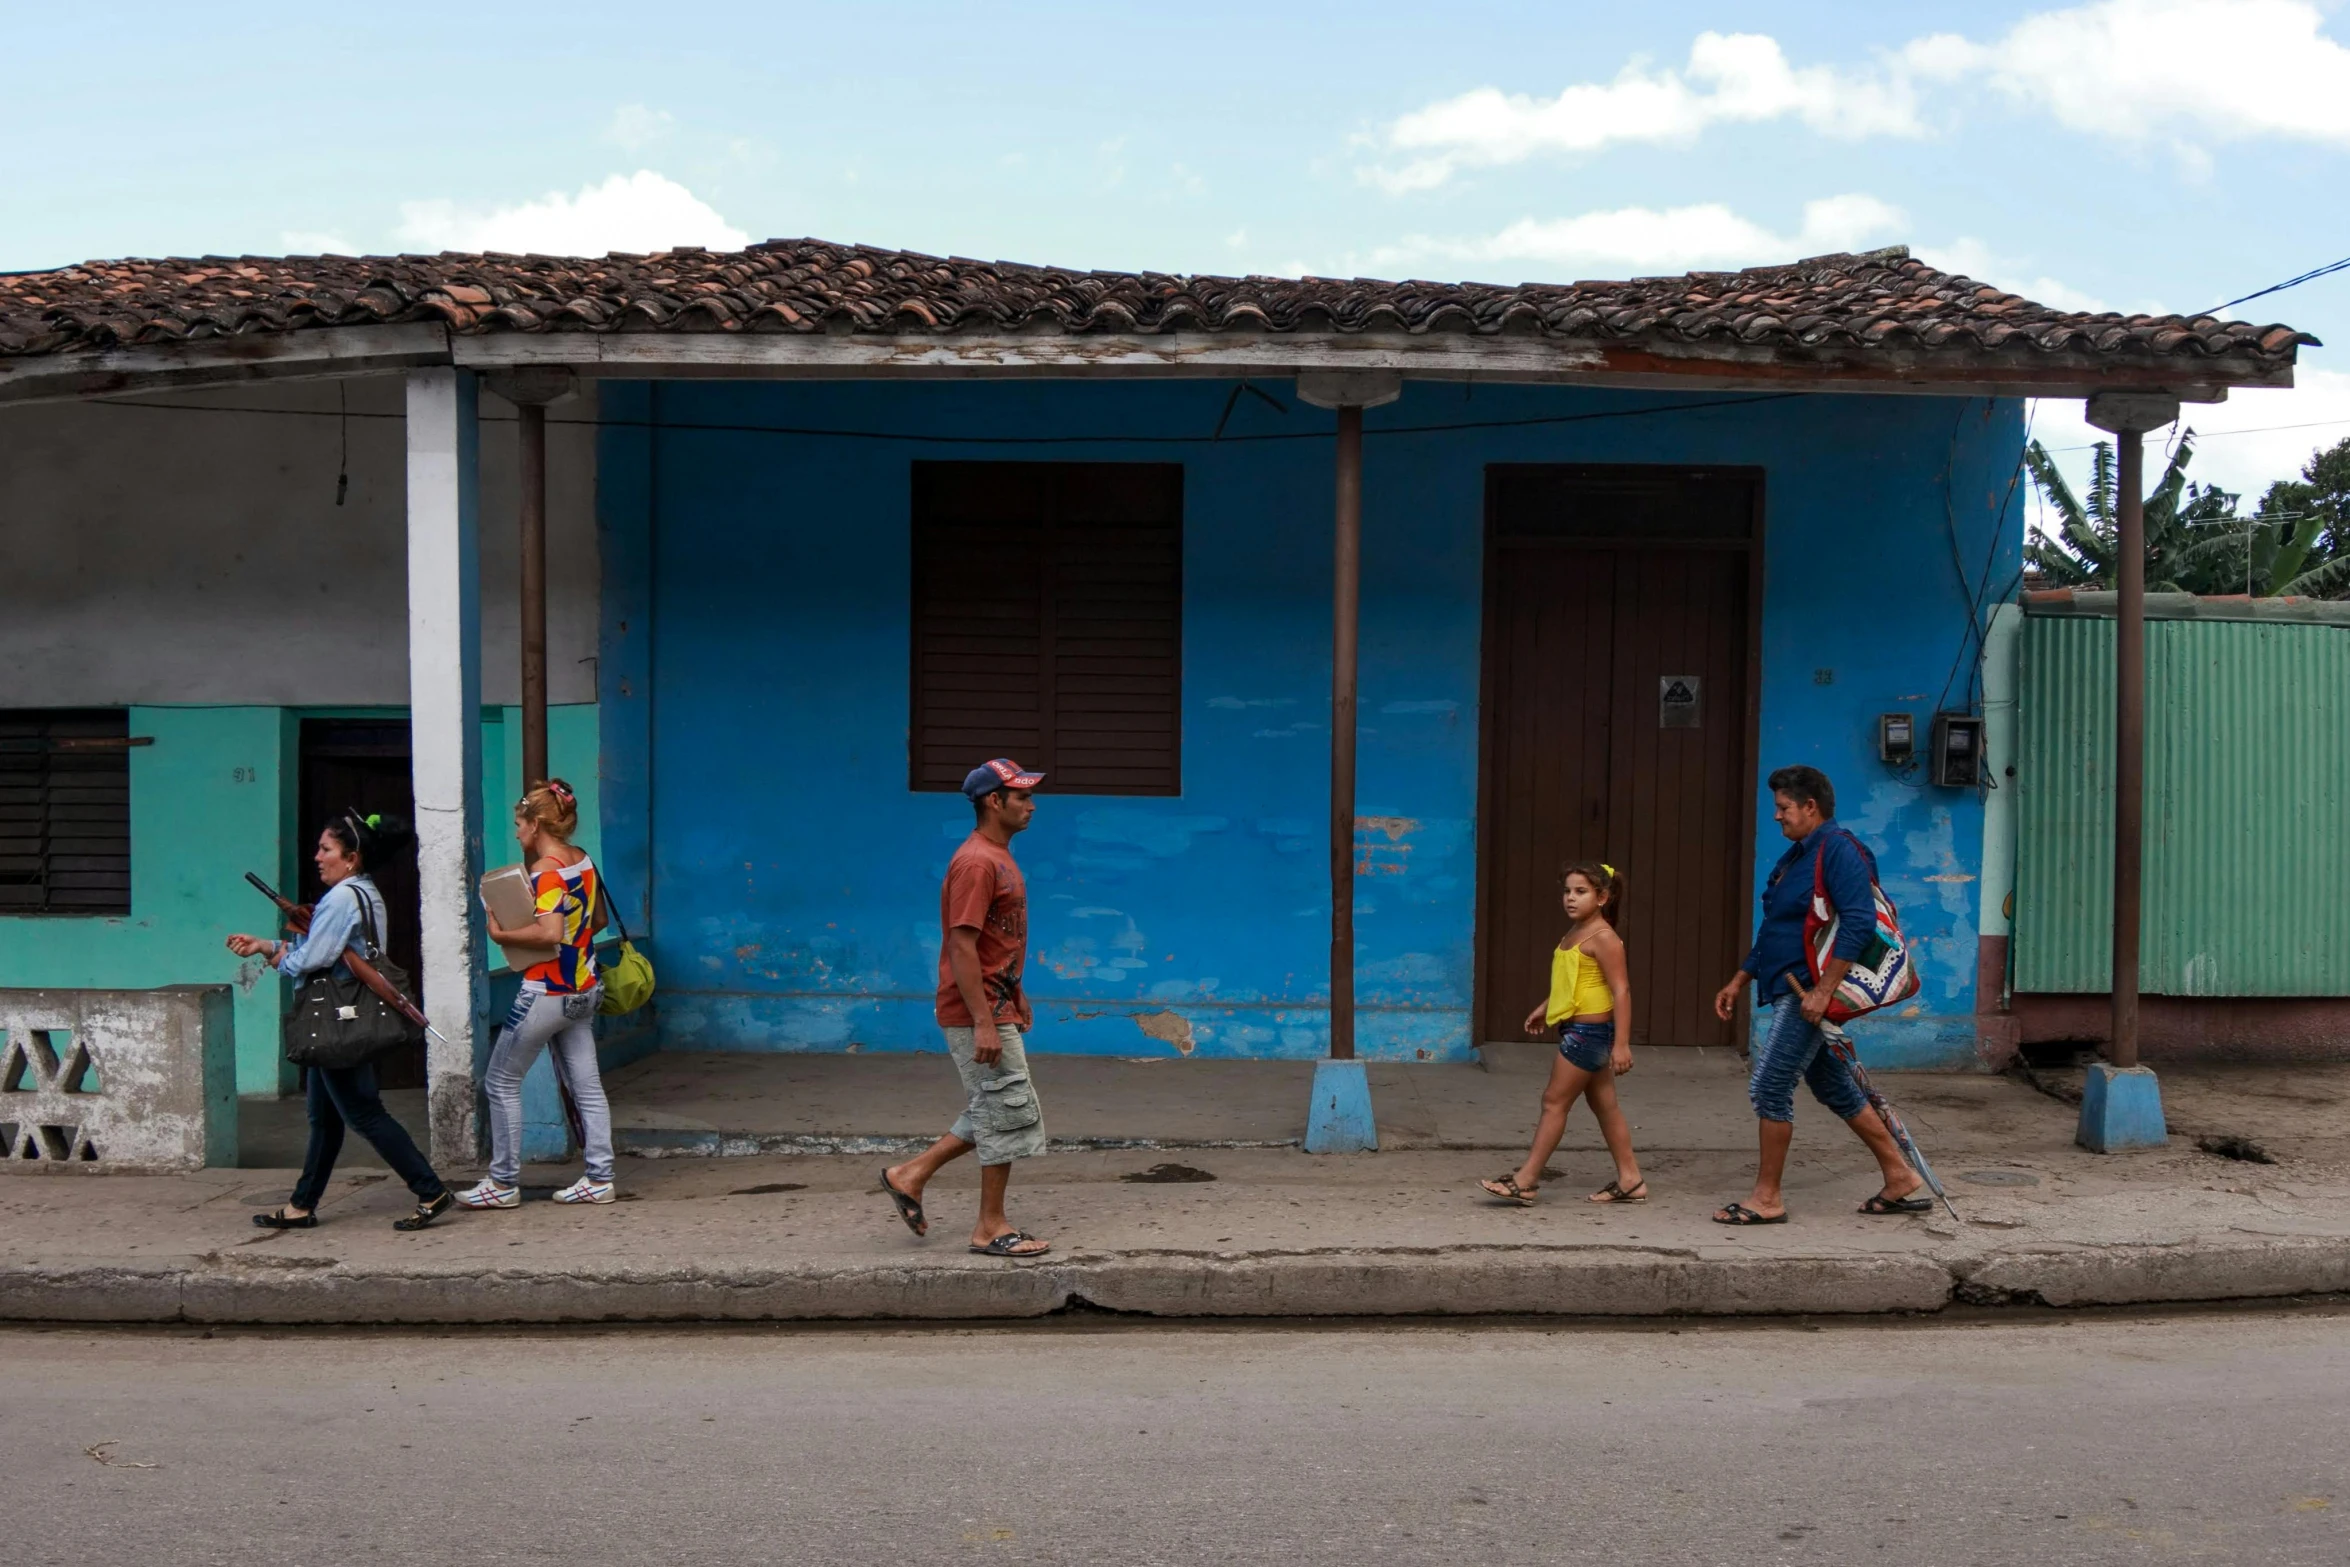 group of people crossing the street, walking by a colorful house